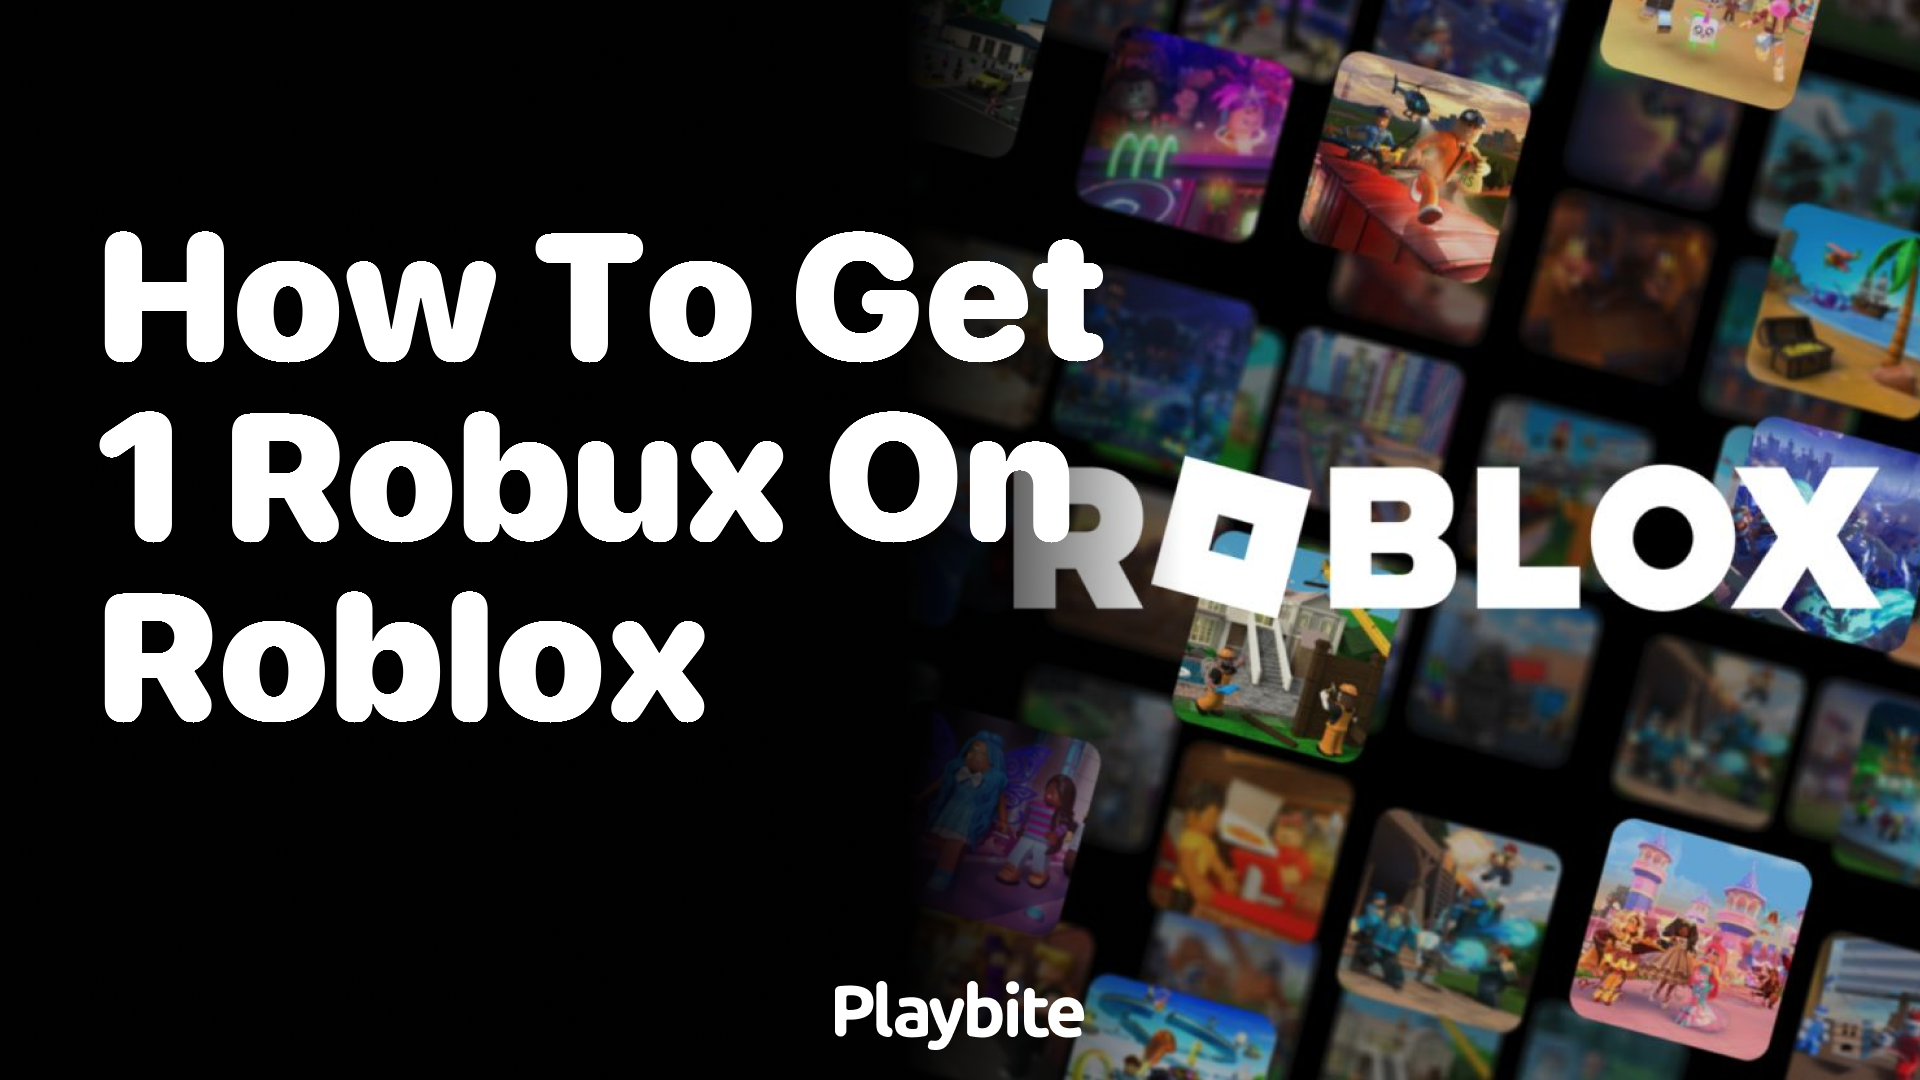 How to Get 1 Robux on Roblox